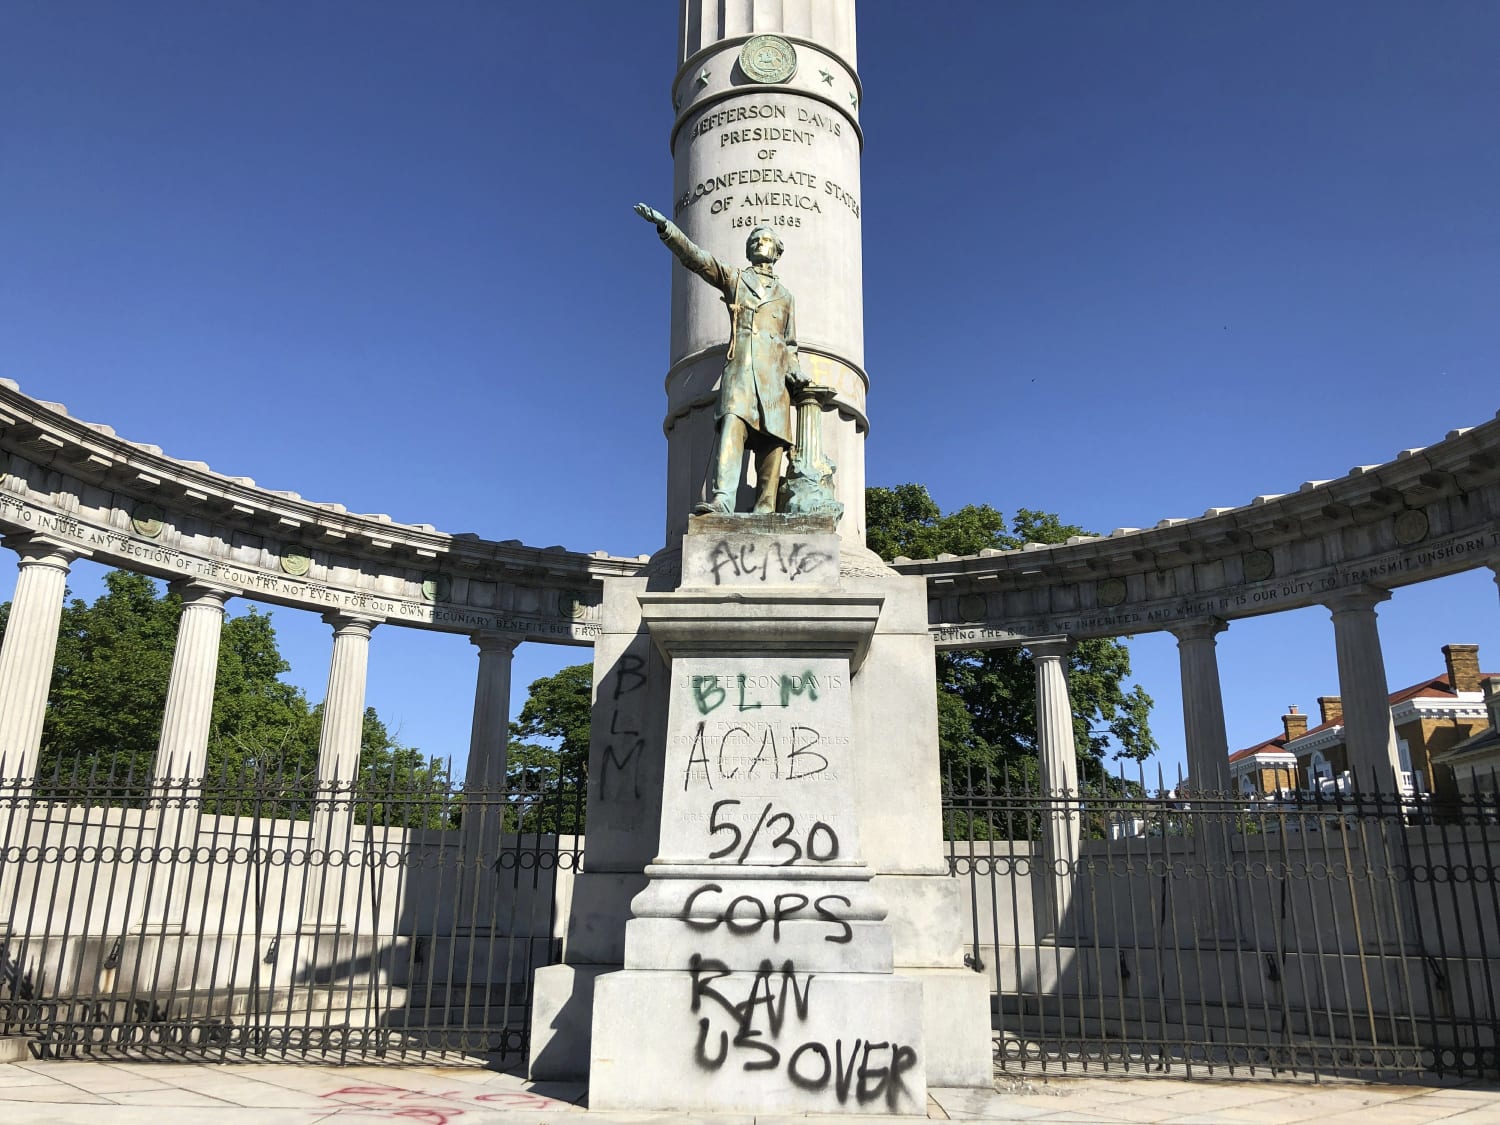 Protesters in some cities target Confederate monuments